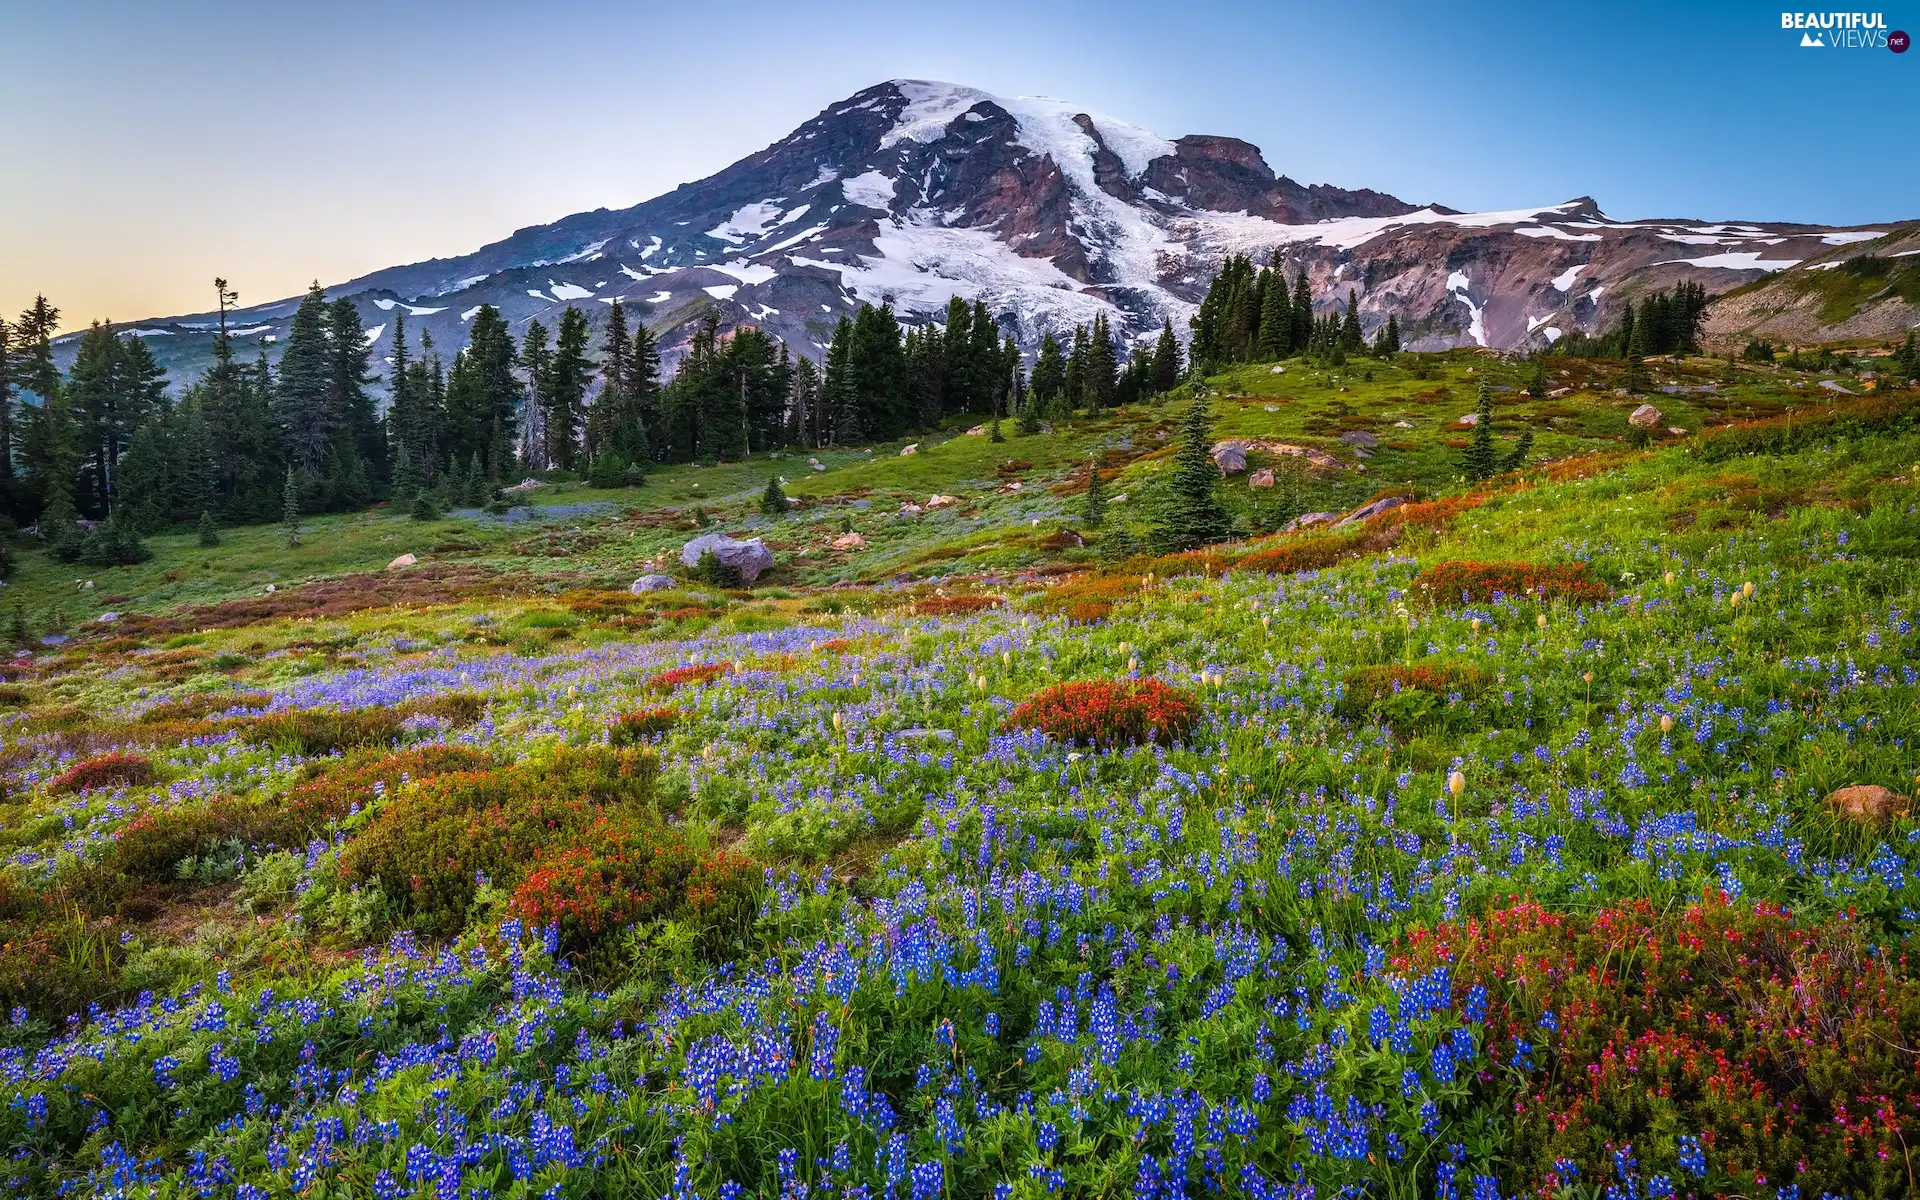 lupine, Snowy, viewes, Washington State, Meadow, Mountains, trees, The United States, Mount Rainier National Park, Flowers